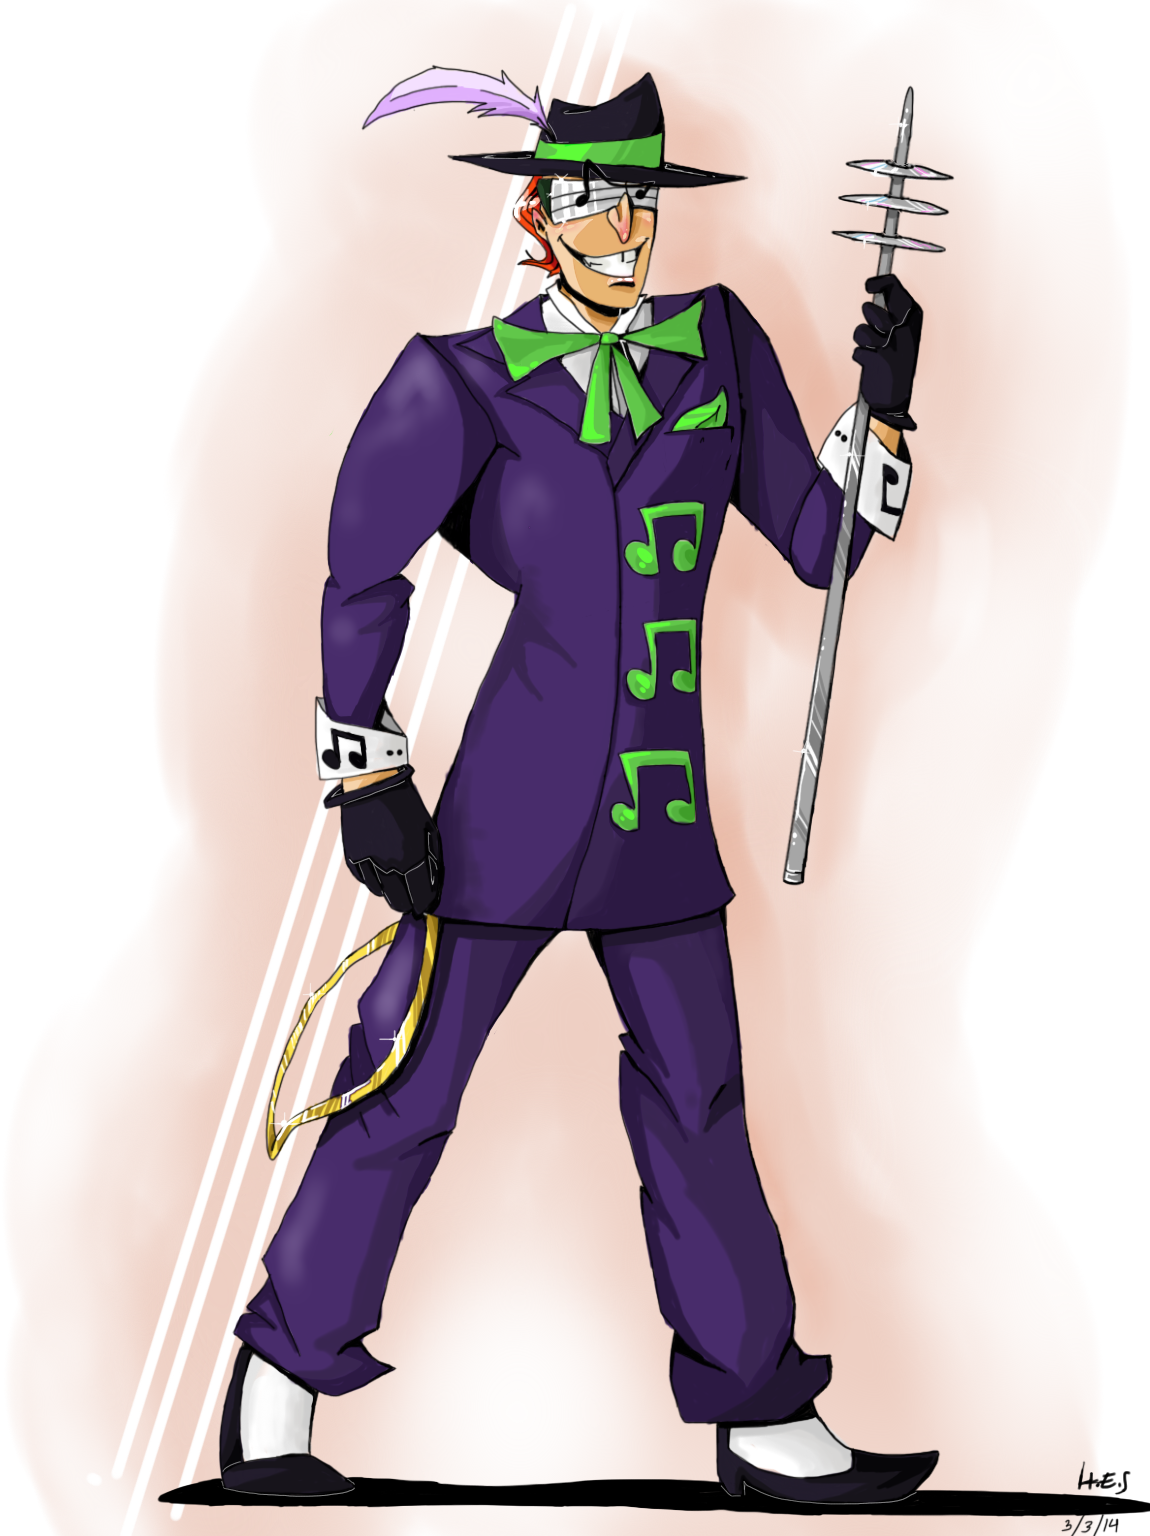 The Music Meister by PsychopathicPussyCat on DeviantArt